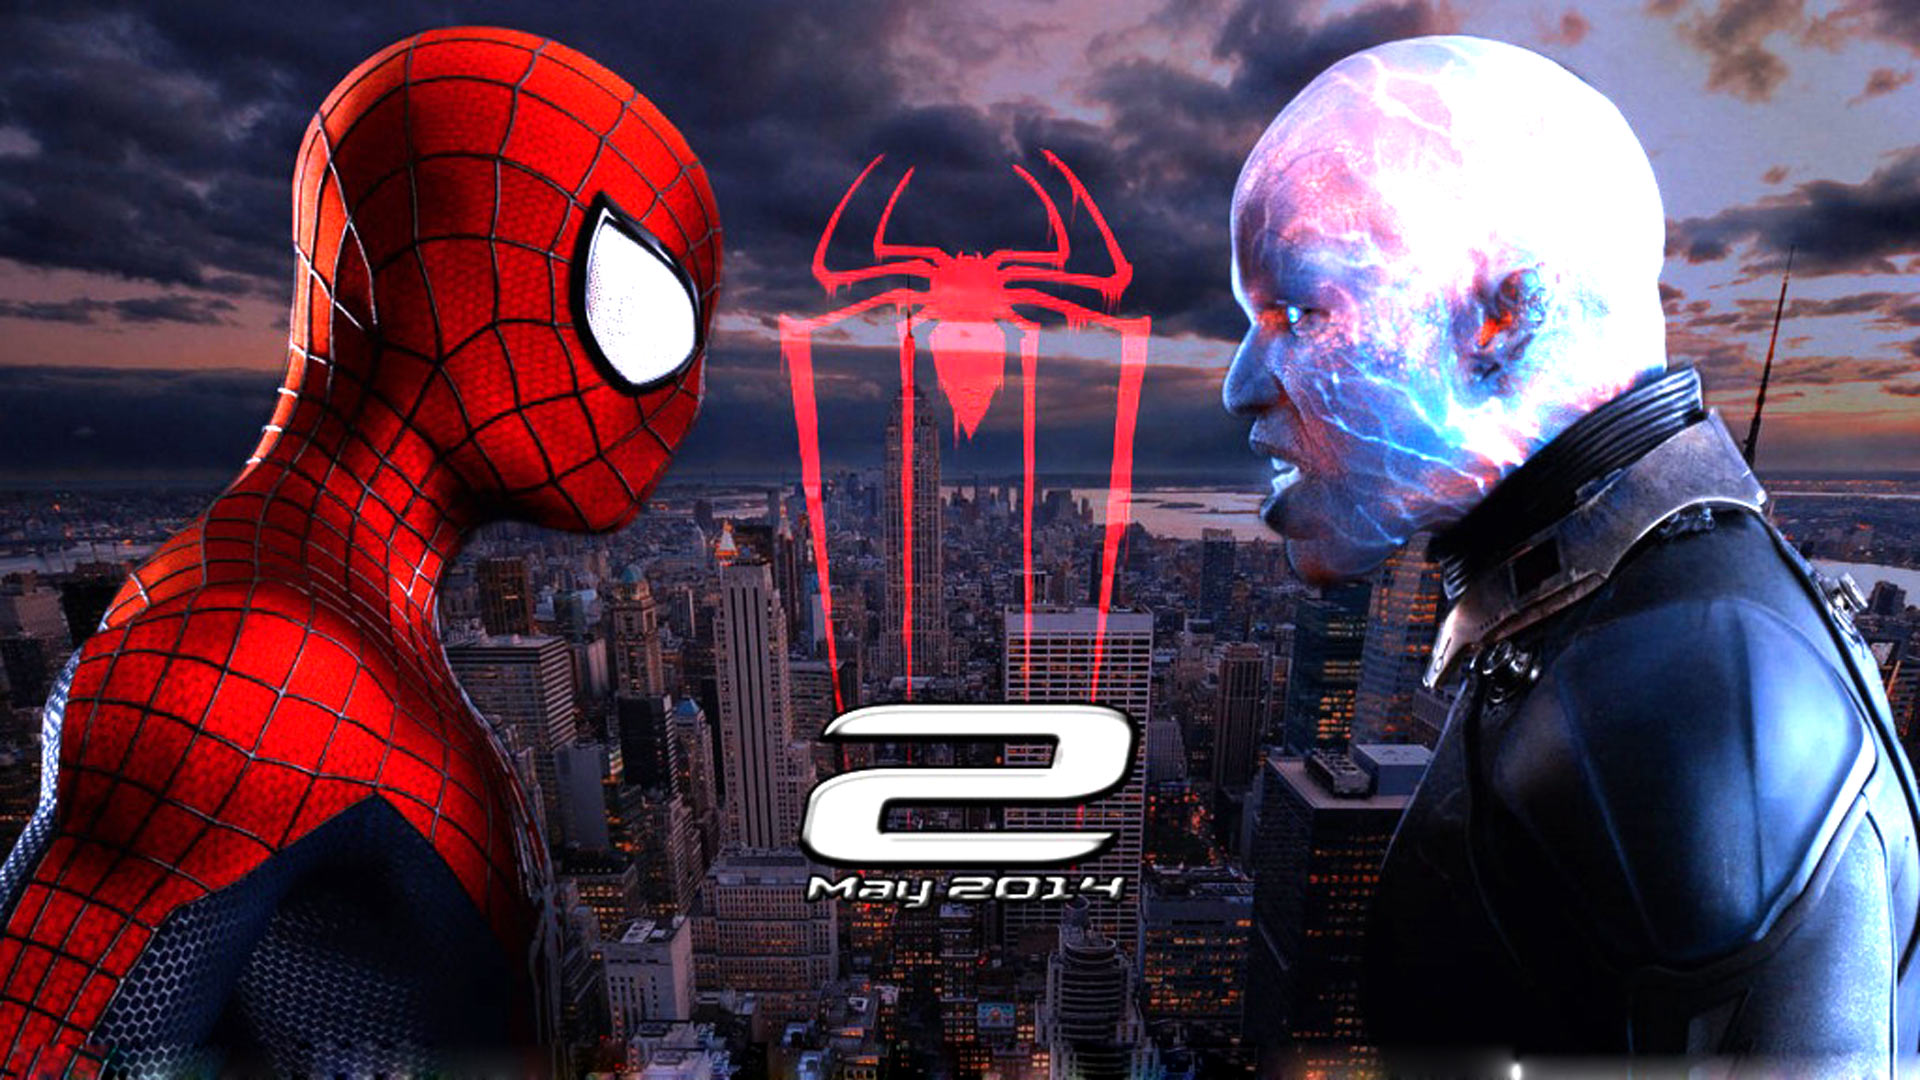 Amazing Spider Man 2 Wallpaper for PC Full HD Pictures